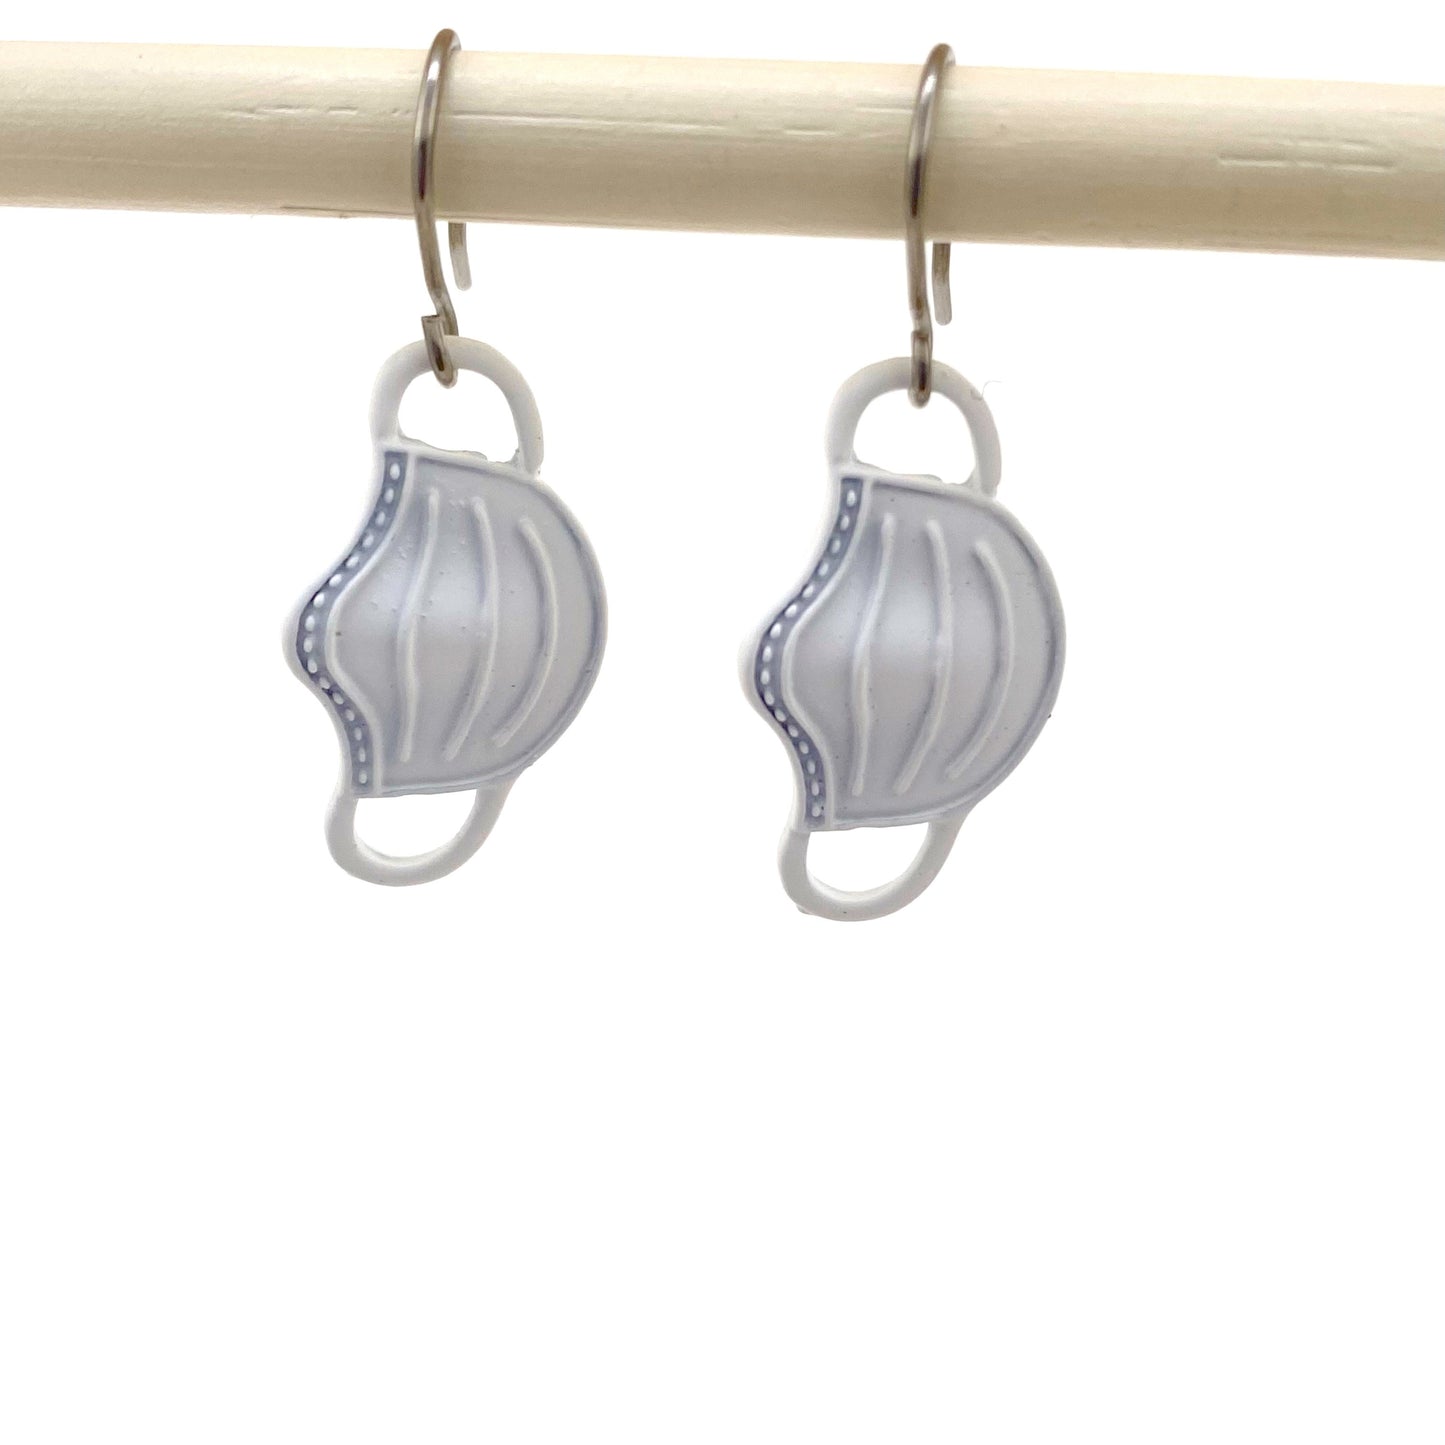 Health care mask earrings with a titanium hook on a white background